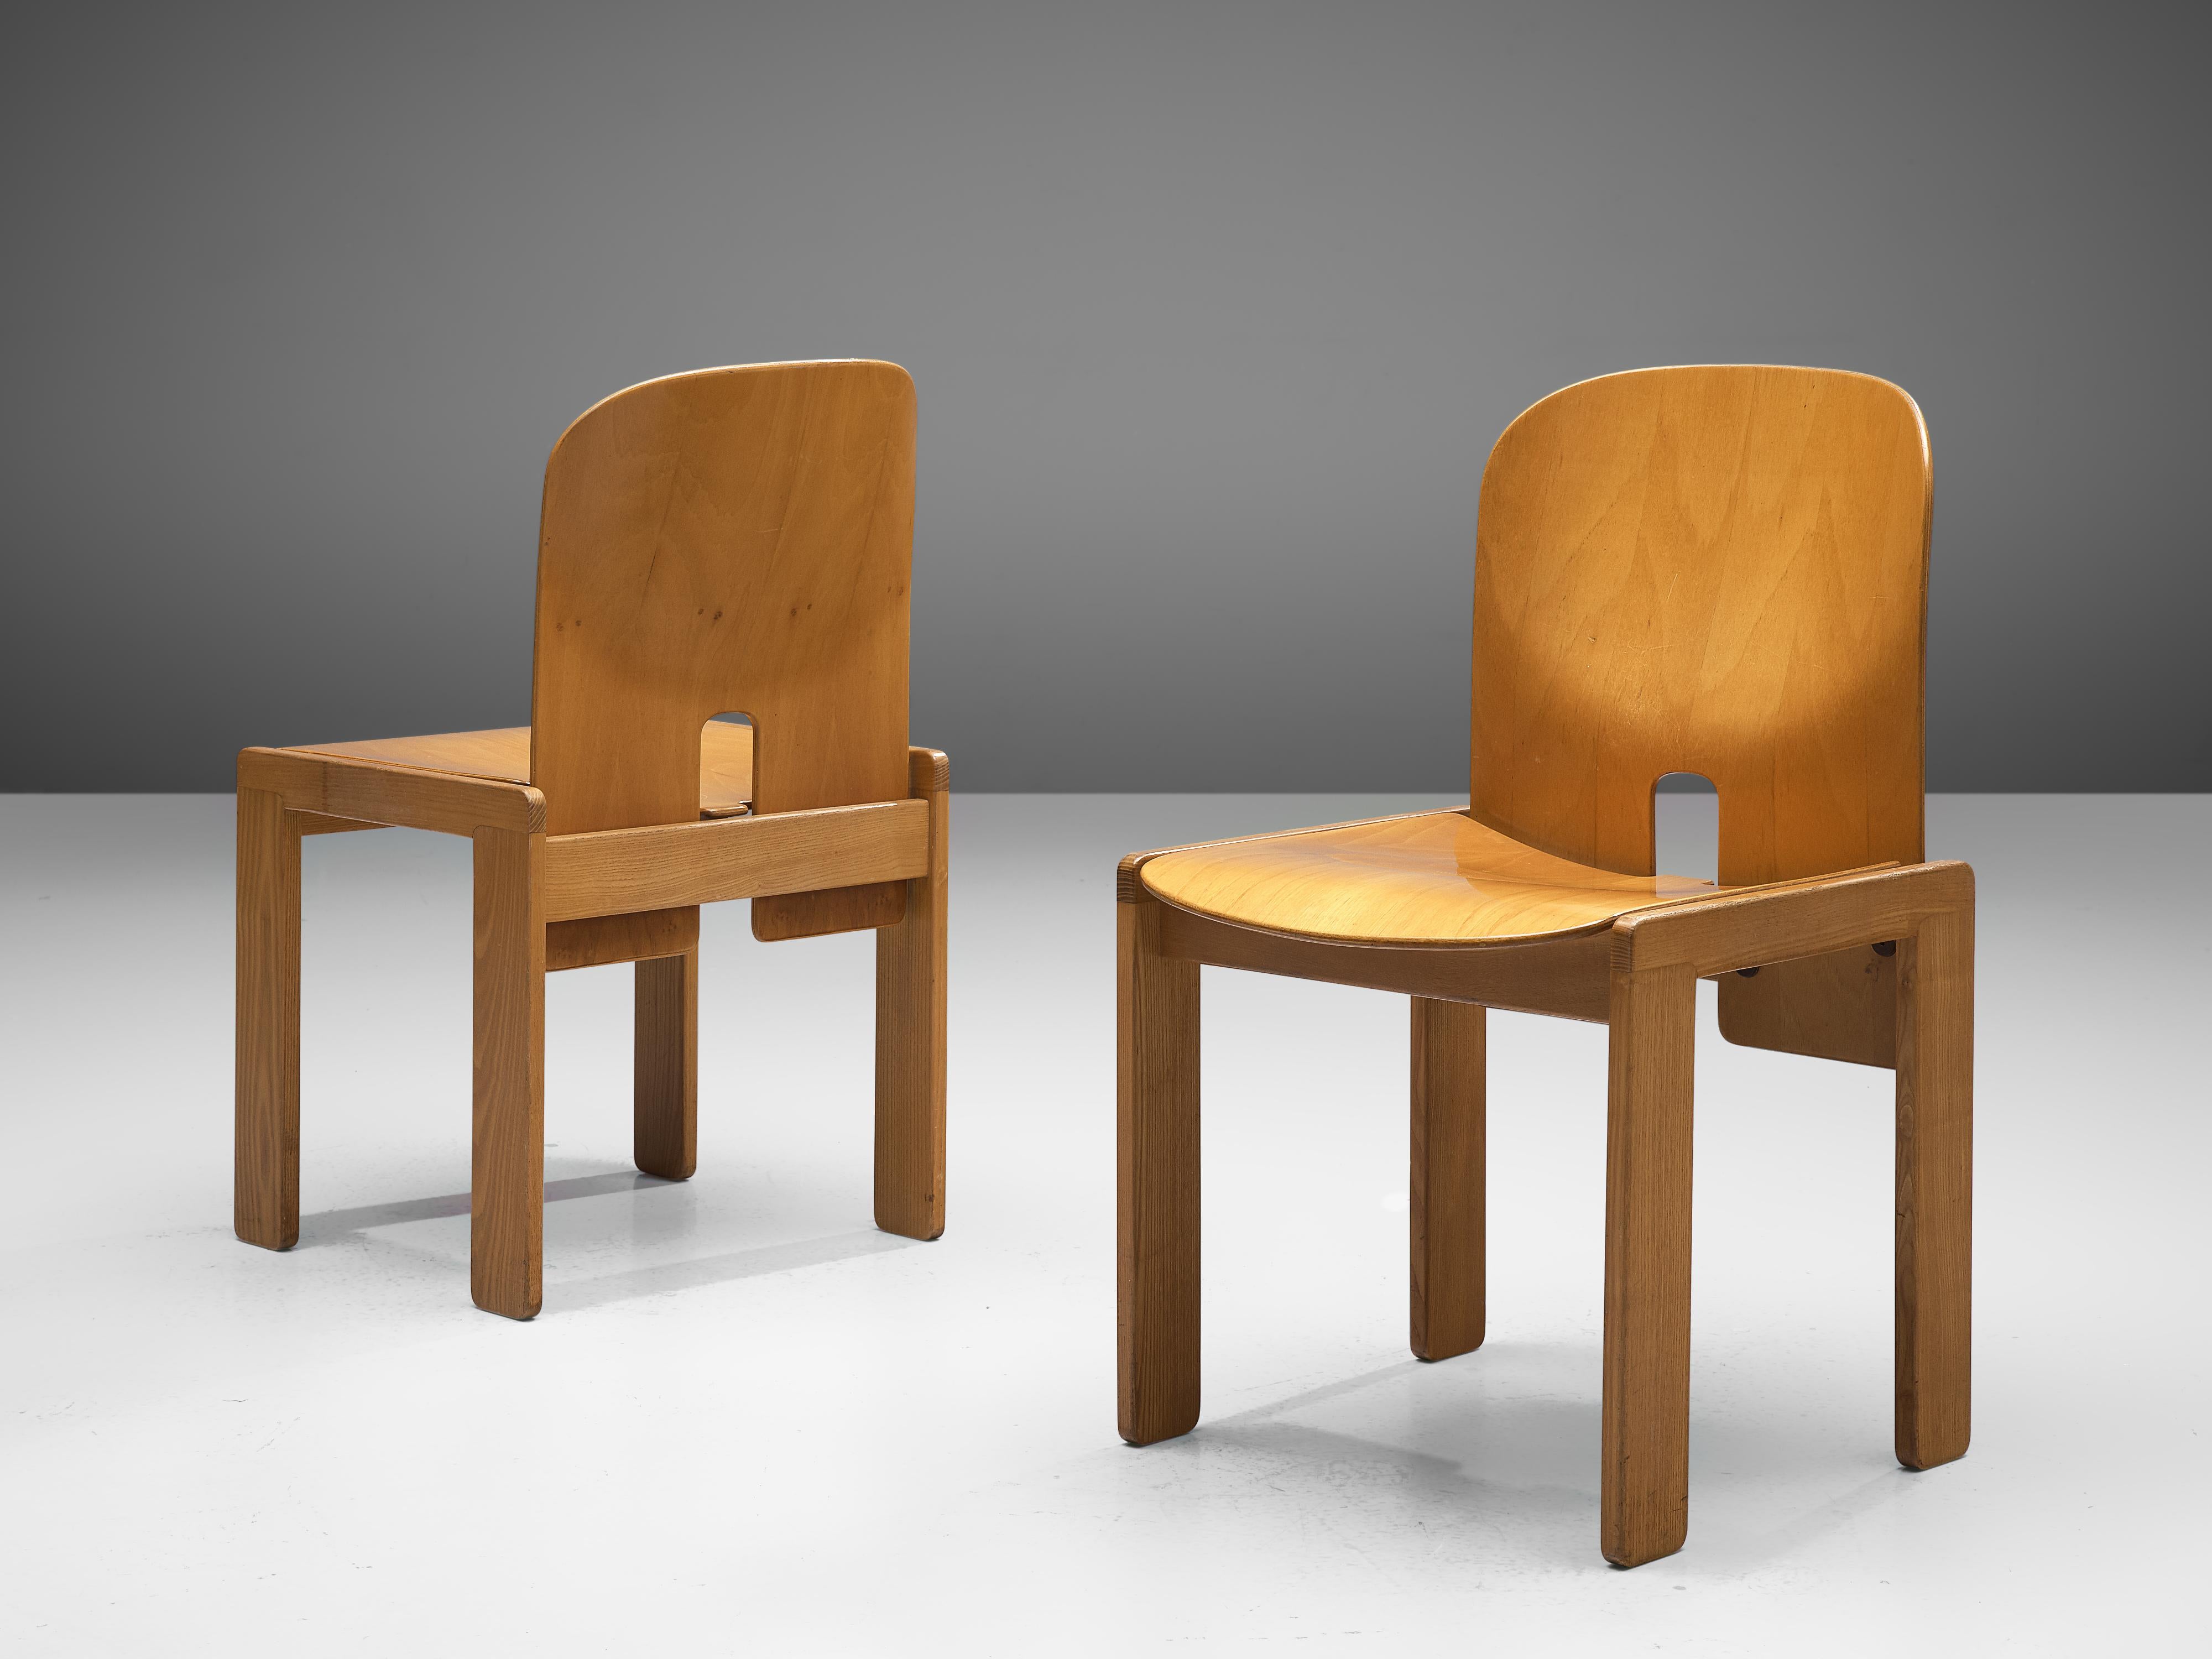 Afra & Tobia Scarpa for Cassina, dining chairs model 121, maple, ash, Italy, design 1965, production later

Dining chairs by the Italian designer couple Tobia and Afra Scarpa. These chairs have a cubic and architectural appearance. The base